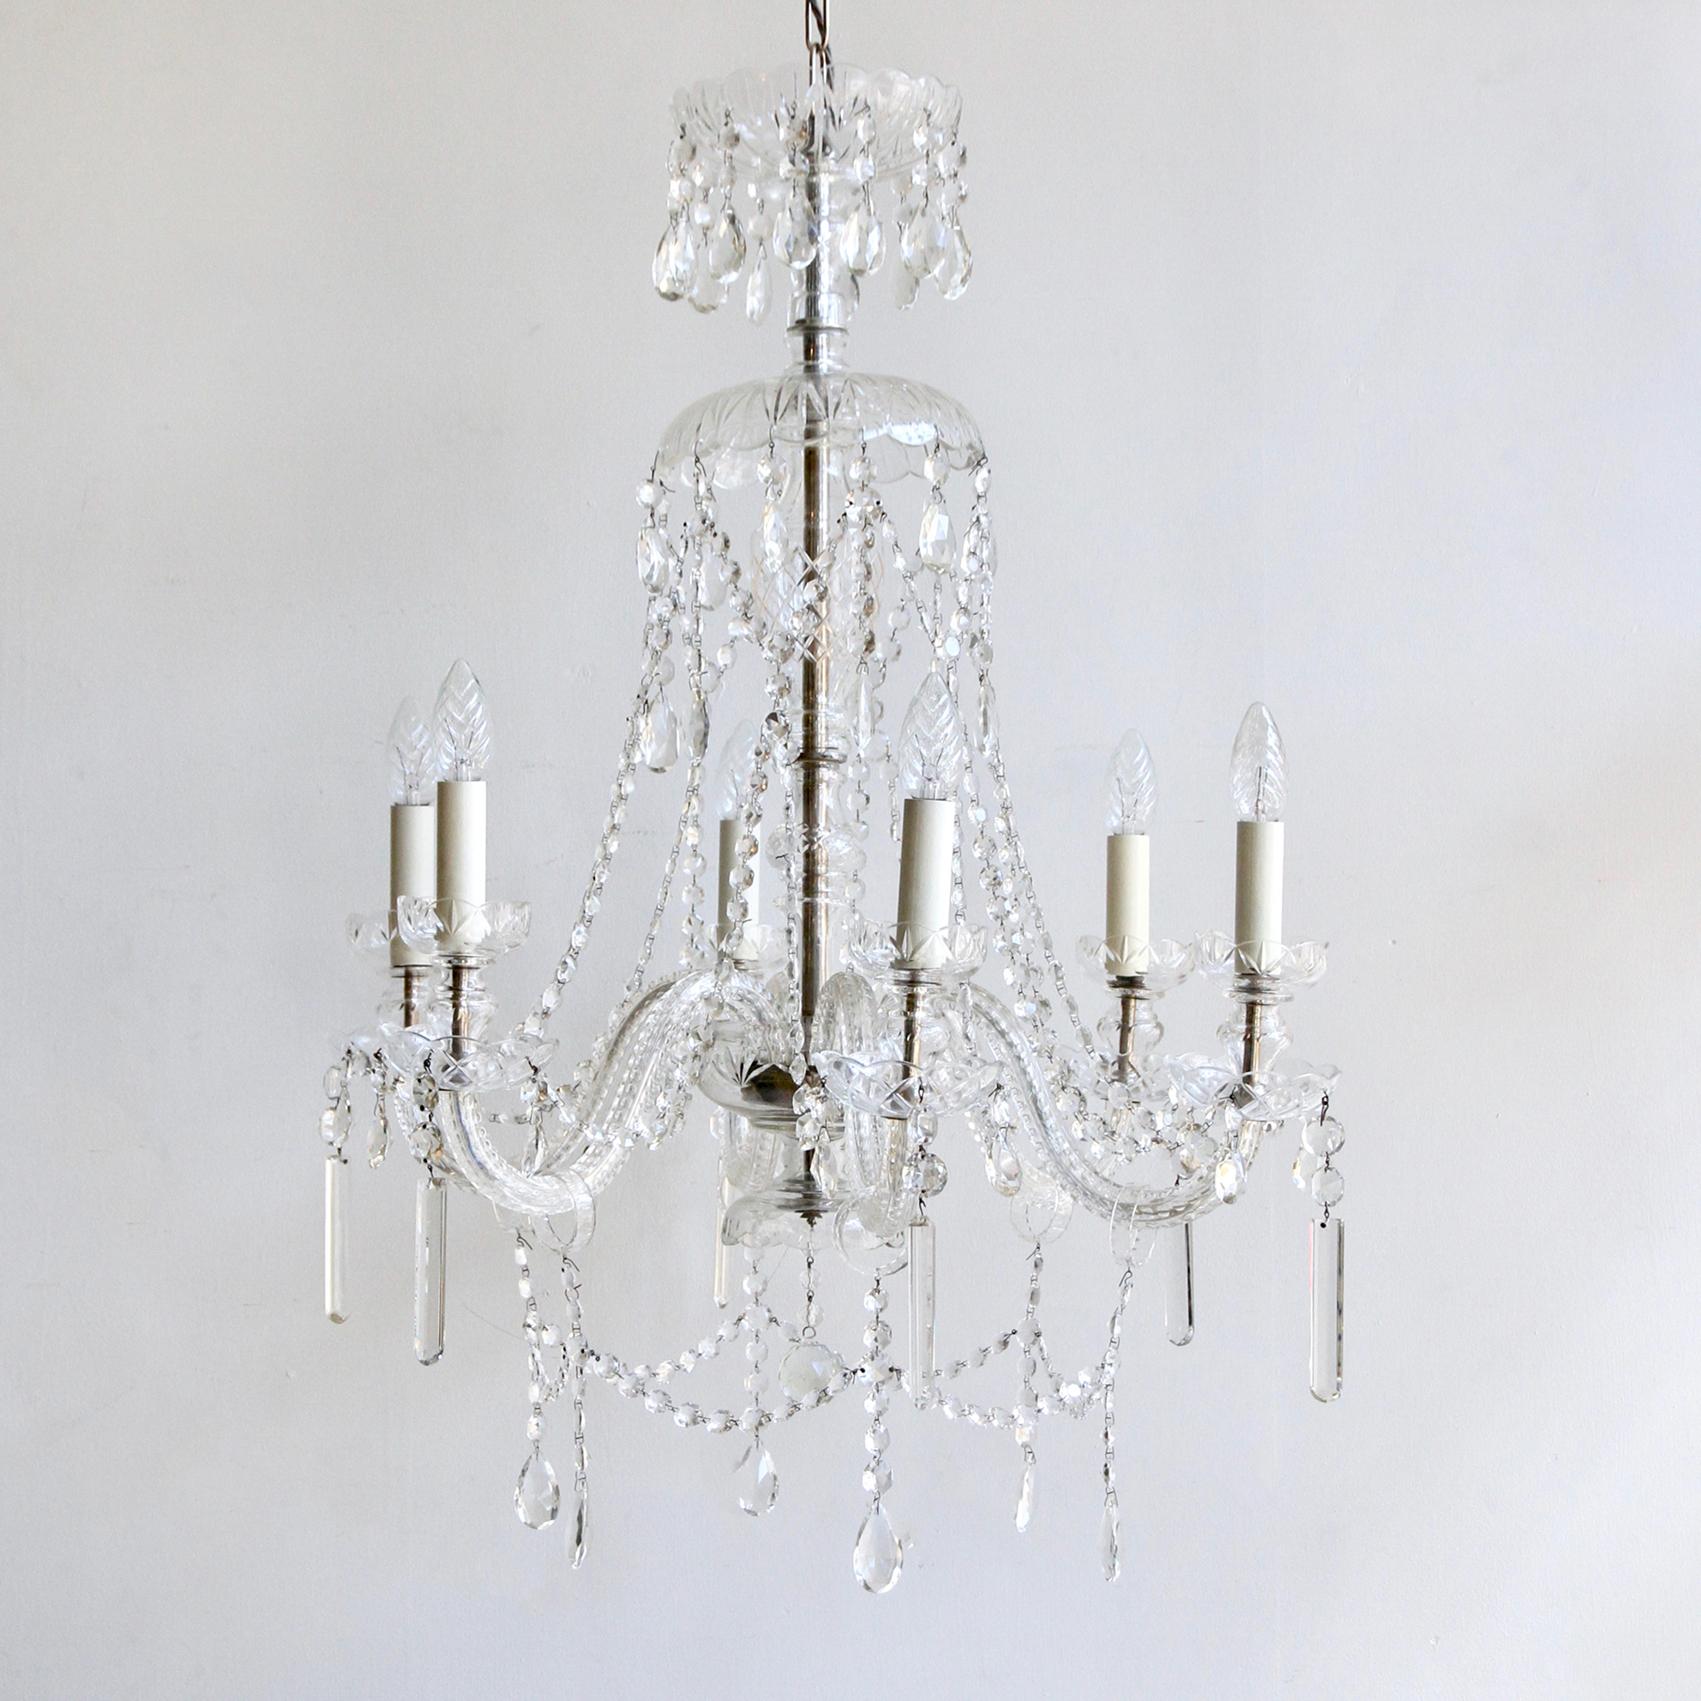 This large Bohemian crystal chandelier originates from Czechoslovakian circa 1930s. It's elegant crystal swan neck arms hold six lamps. Dressed in unique cut crystal drops with crystal buttons. The chandelier comes supplied with braided flex and